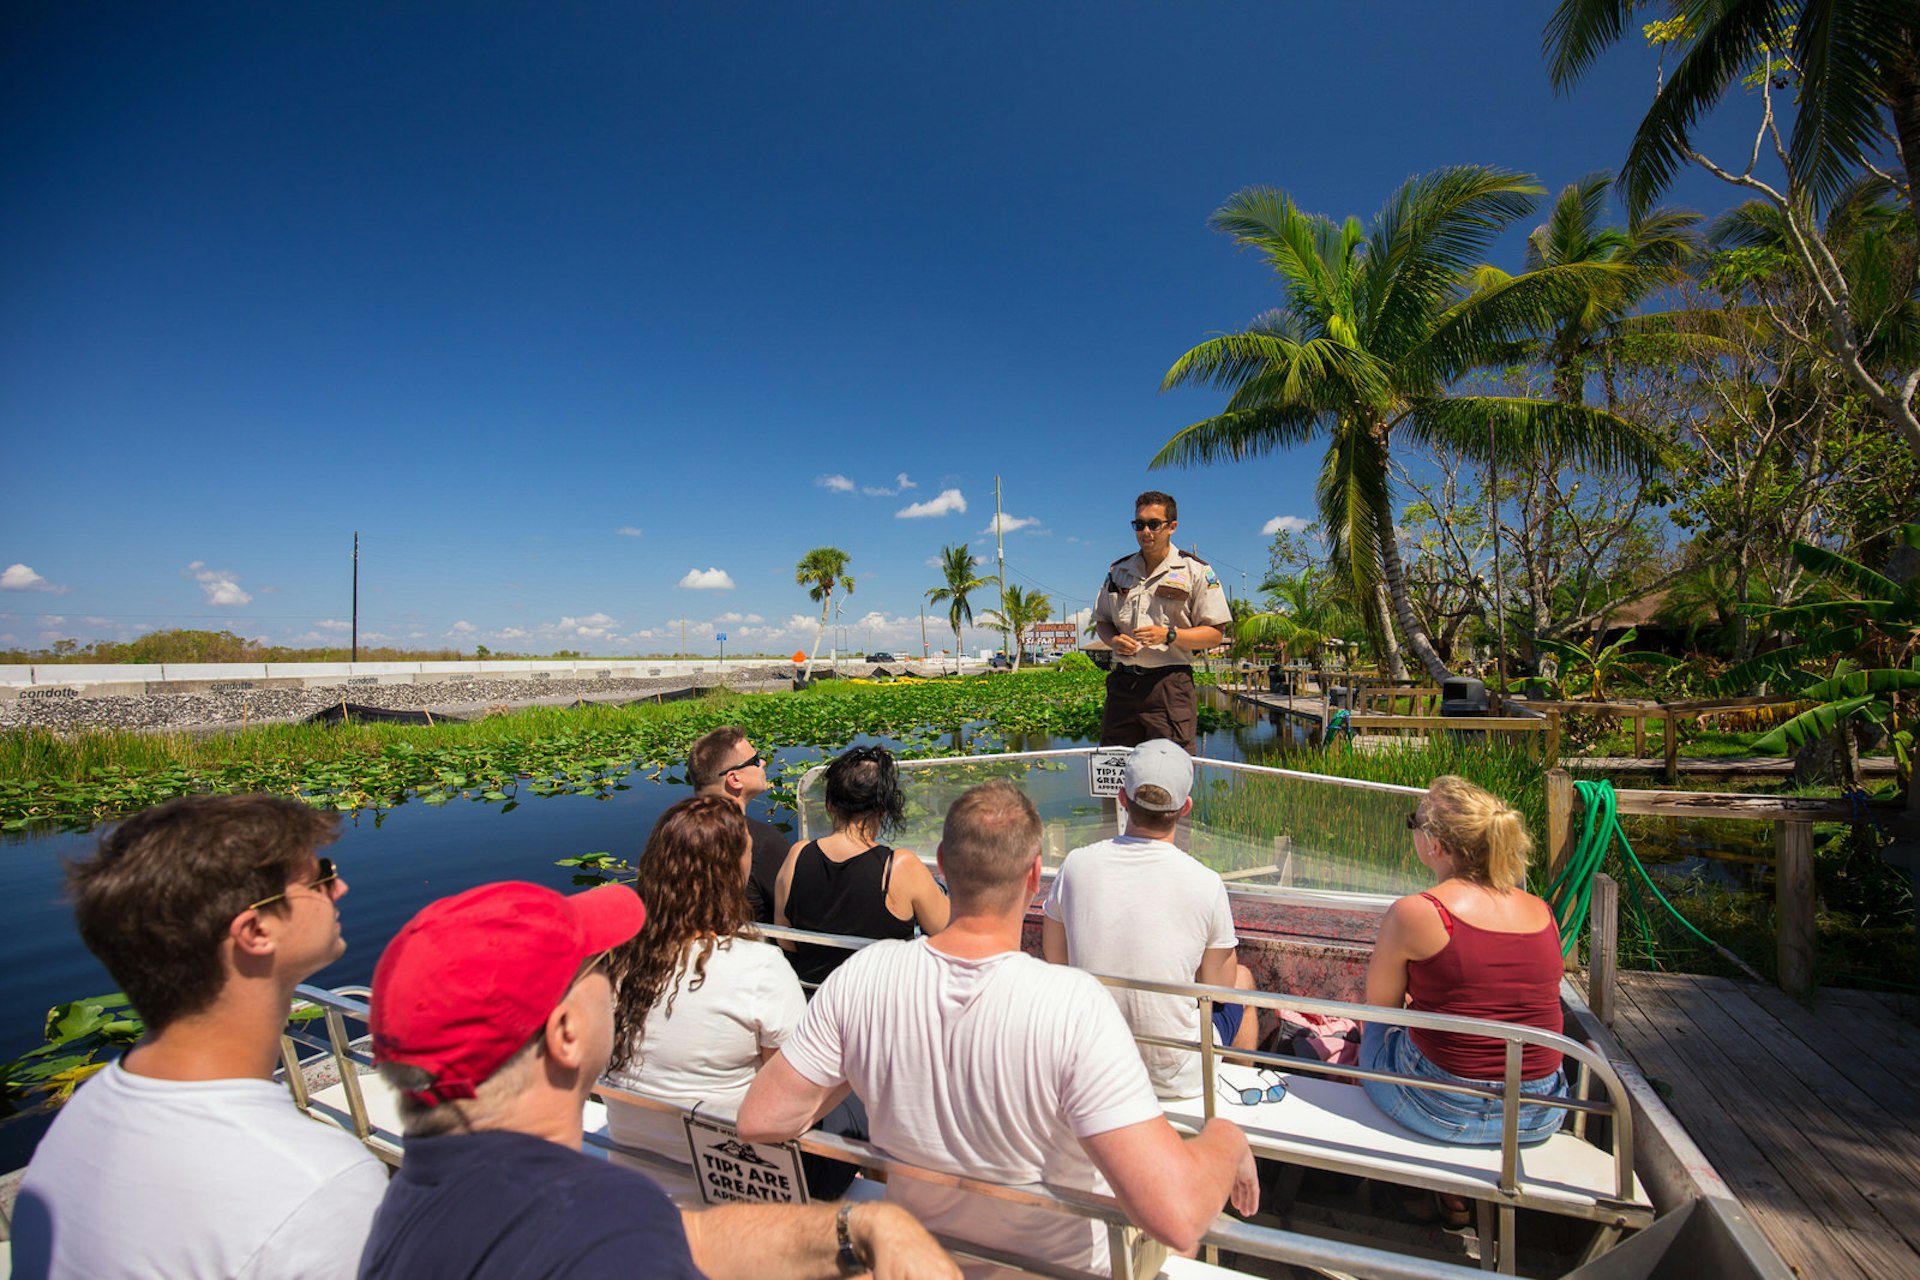 People on a boat tour in the Everglades ©  Sergei Tungusov / Shutterstock